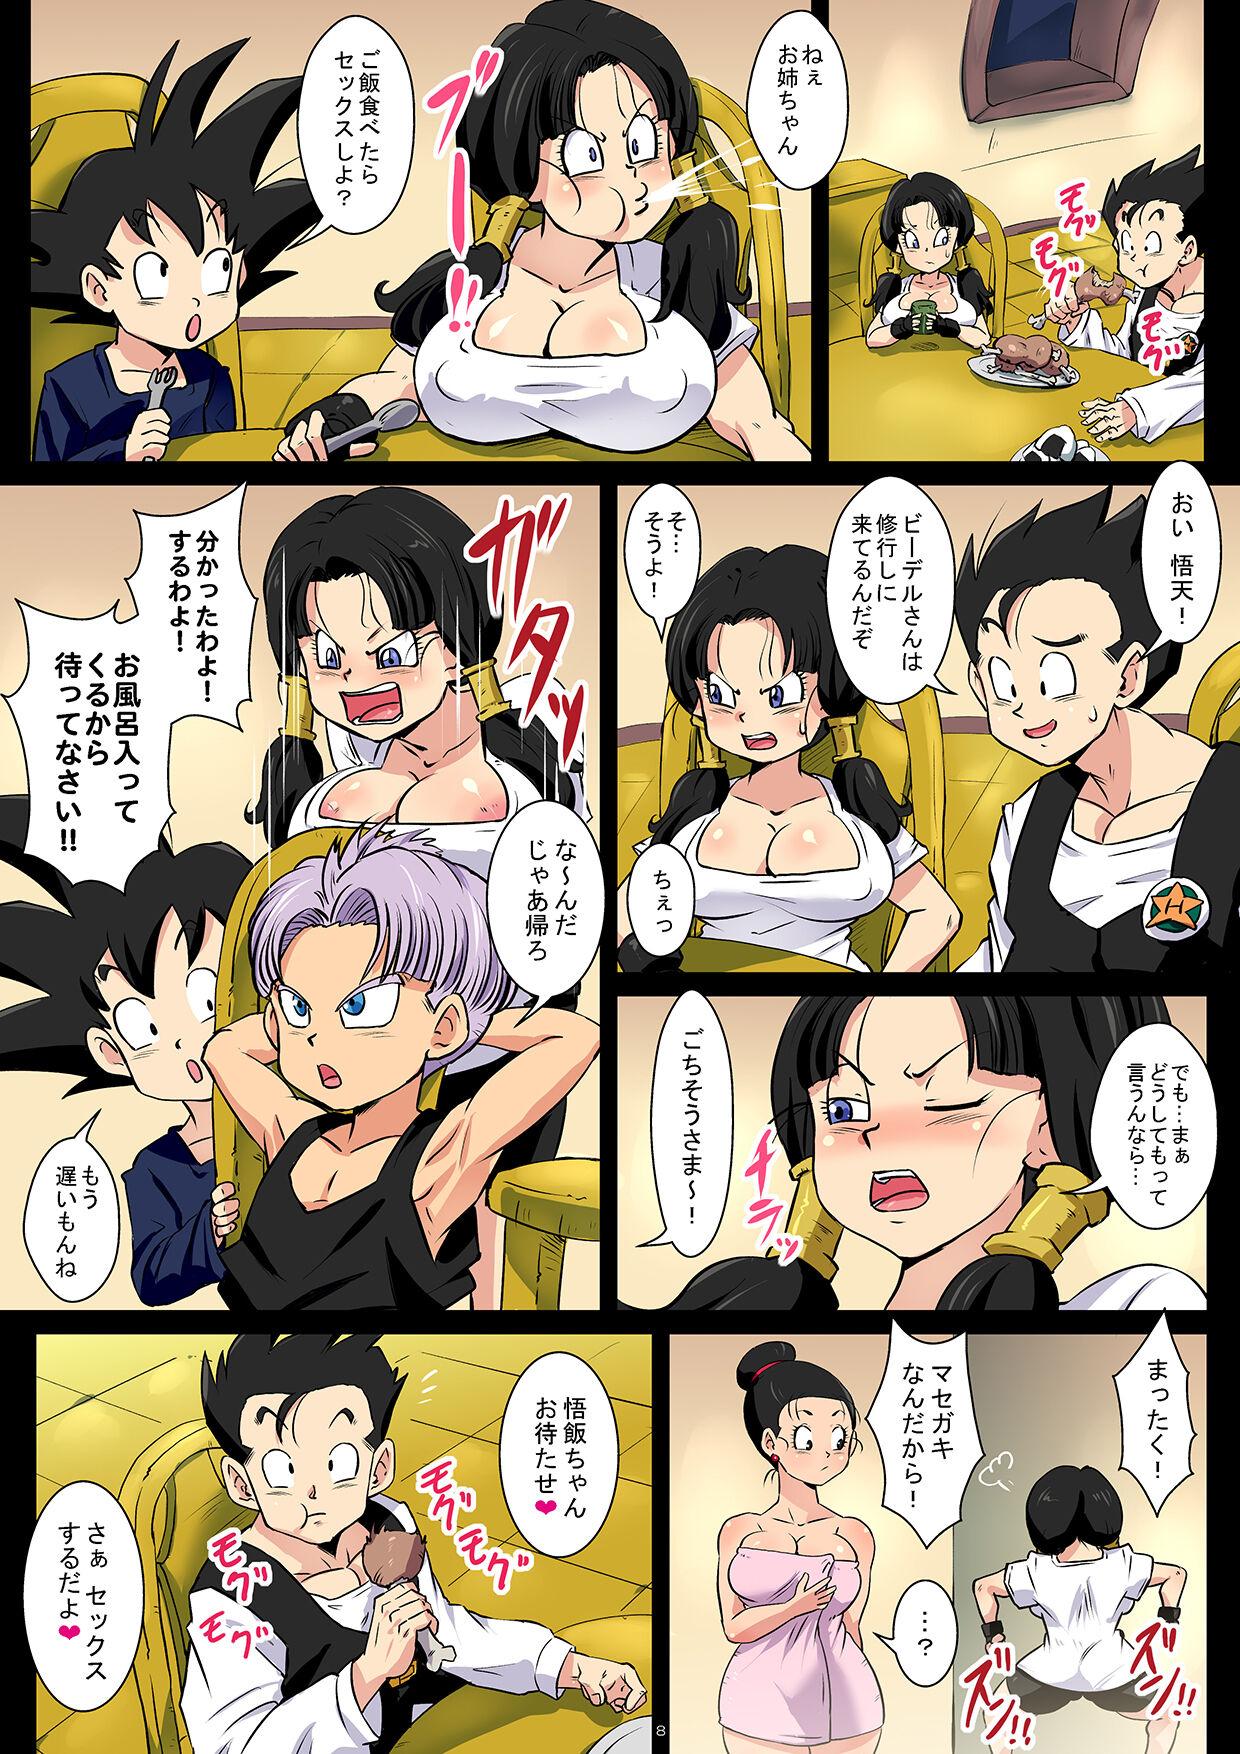 Dress Gohan is addicted to sex with Chi Chi - Dragon ball z Brunet - Page 8